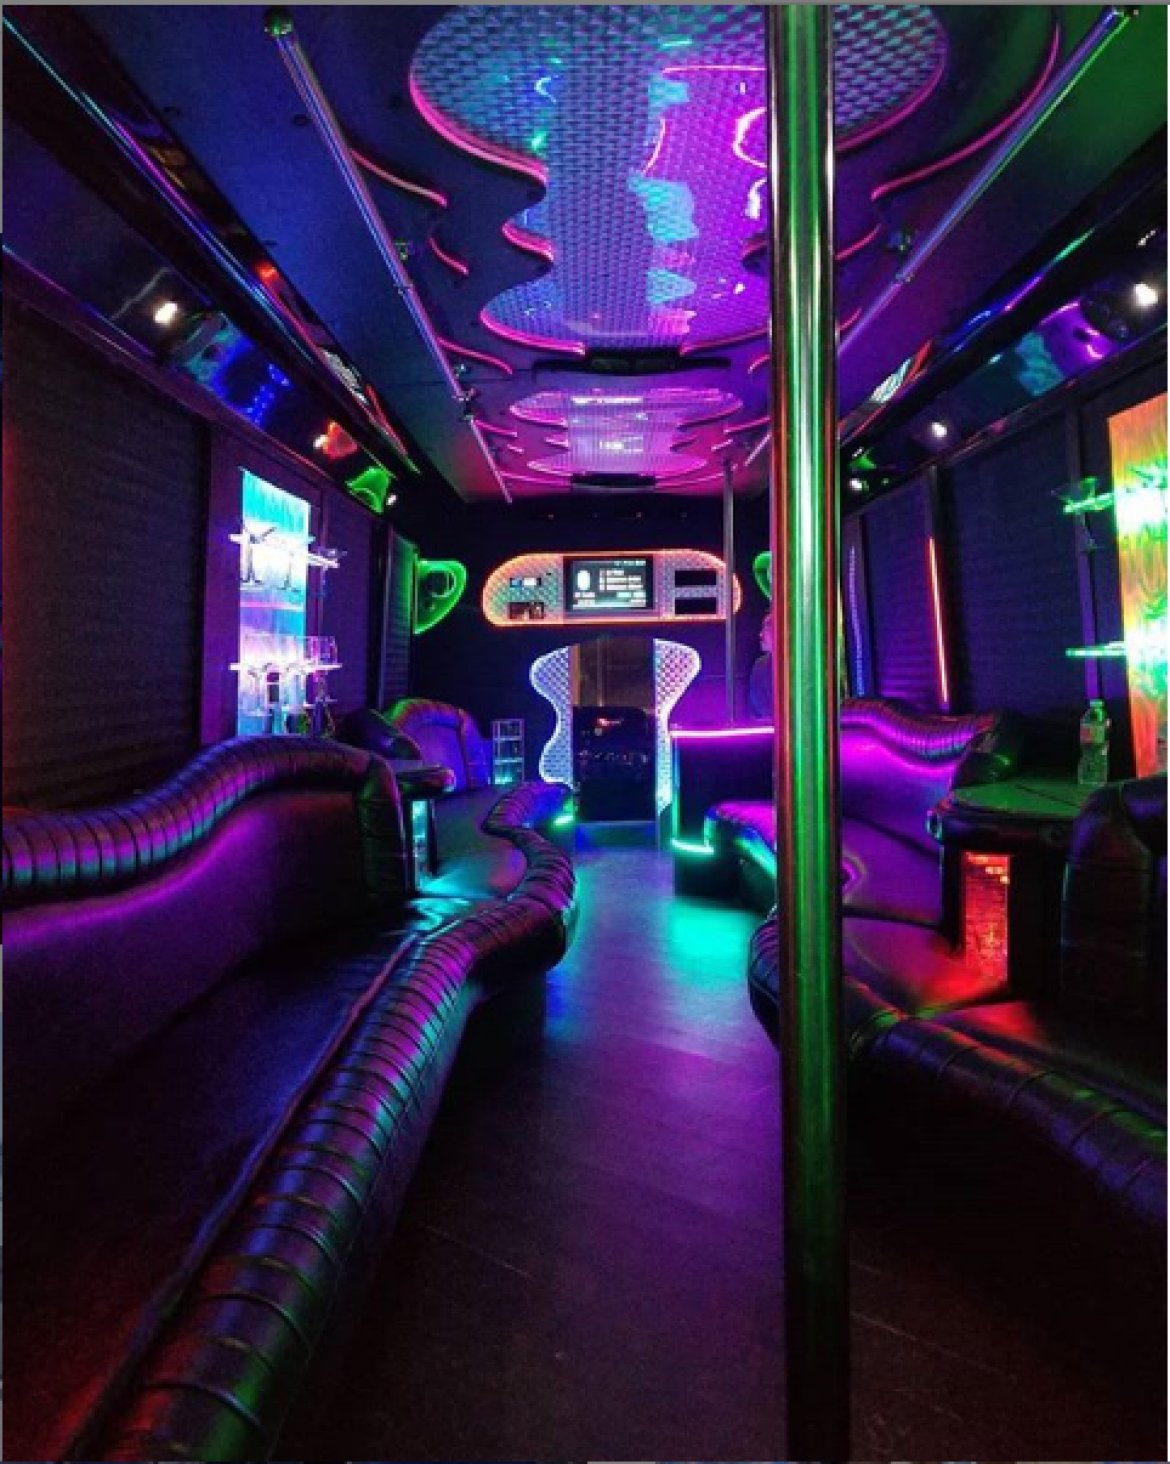 Limo Bus for sale: 2008 Freightliner Freightliner Limousine Bus by Federal